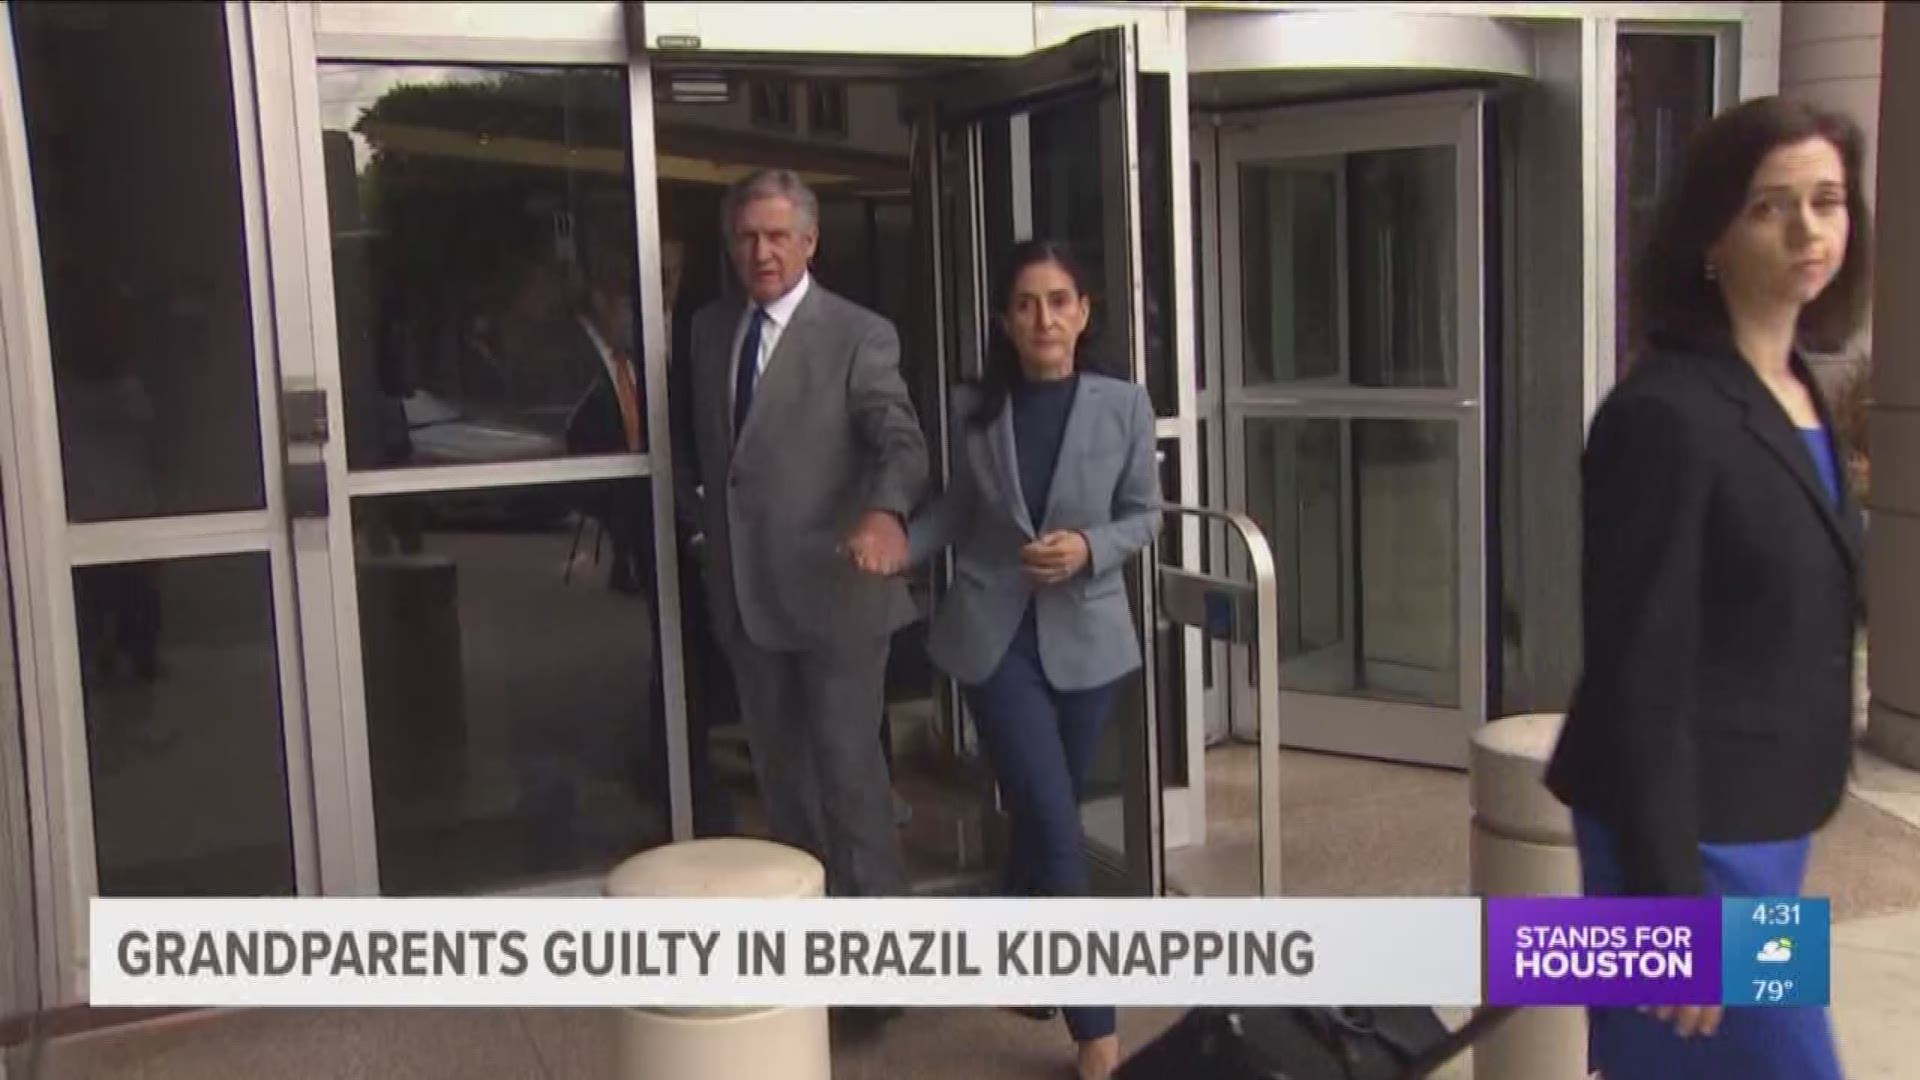 The couple accused in the international kidnapping case involving their grandson was found guilty Friday morning in a Houston courtroom. Jurors found Carlos and Jemima Guimaraes guilty of kidnapping but not guilty of conspiracy. Prosecutors said the coupl